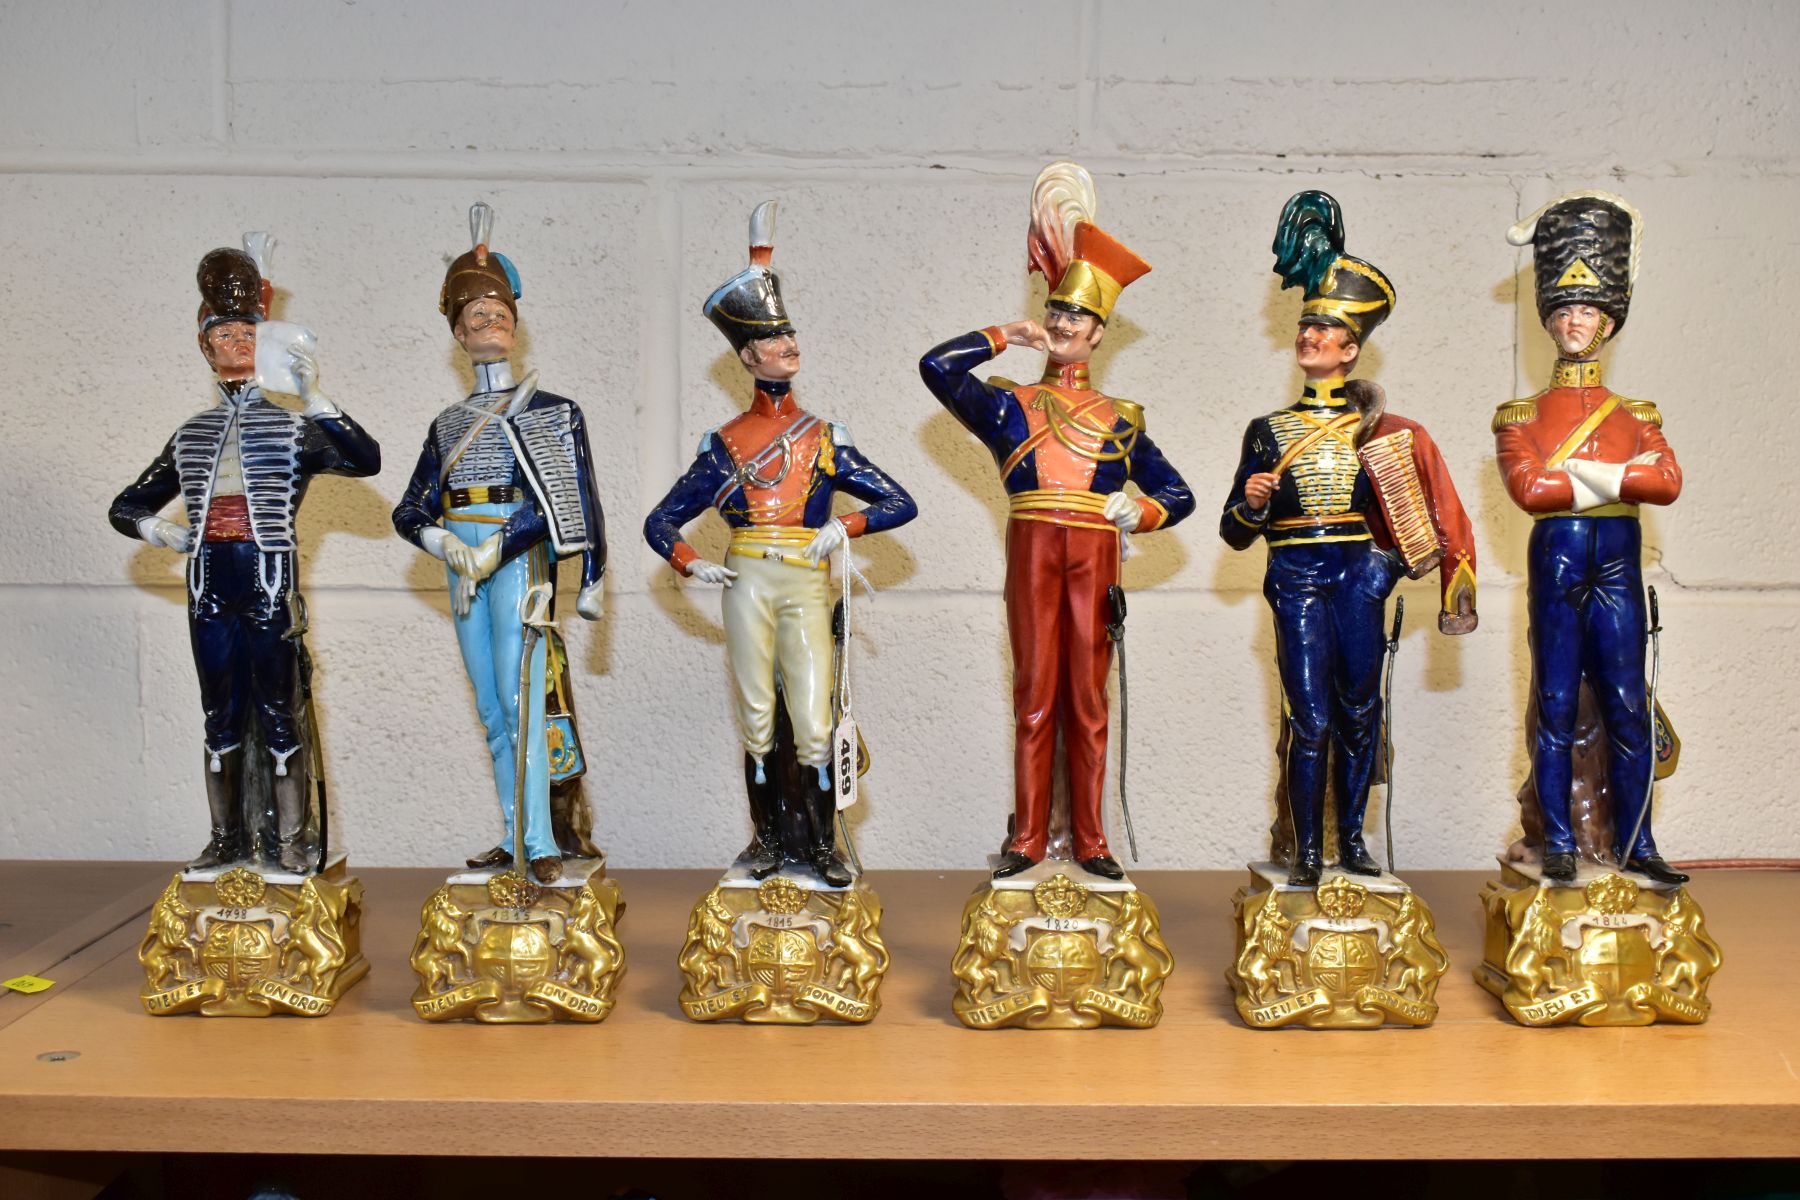 SIX CAPODIMONTE BRUNO MERLI FIGURES OF SOLDIERS IN HISTORICAL COSTUME OF 1798-1844, modelled as